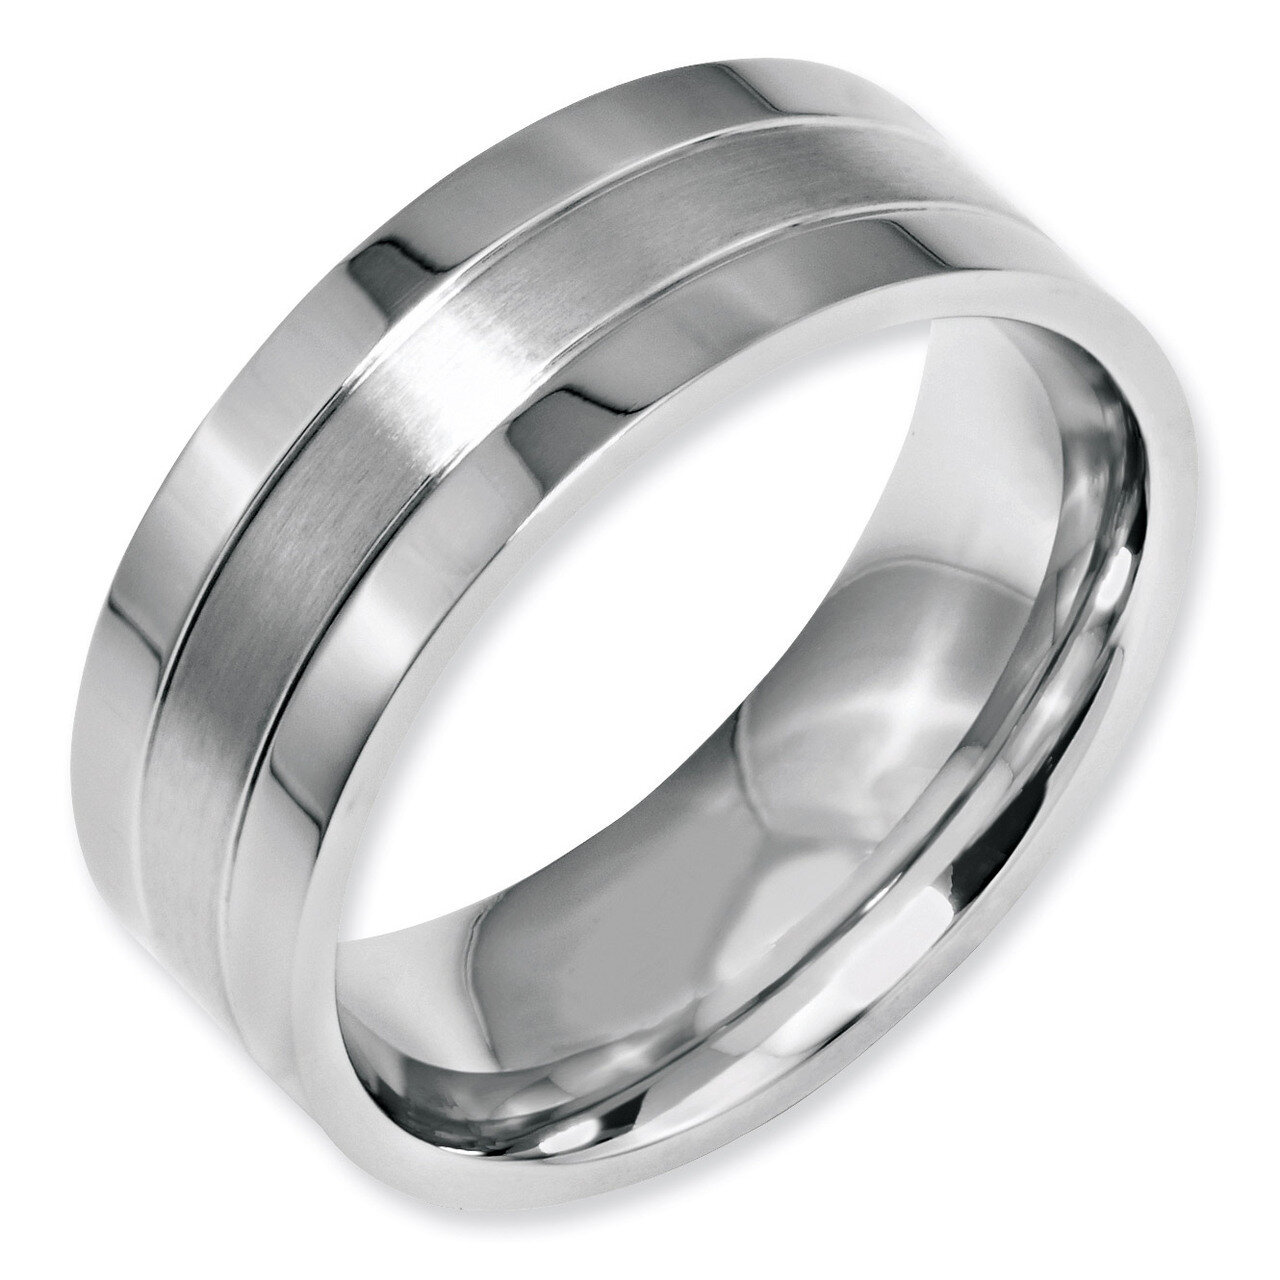 Grooved 8mm Satin and Polished Band - Stainless Steel SR31